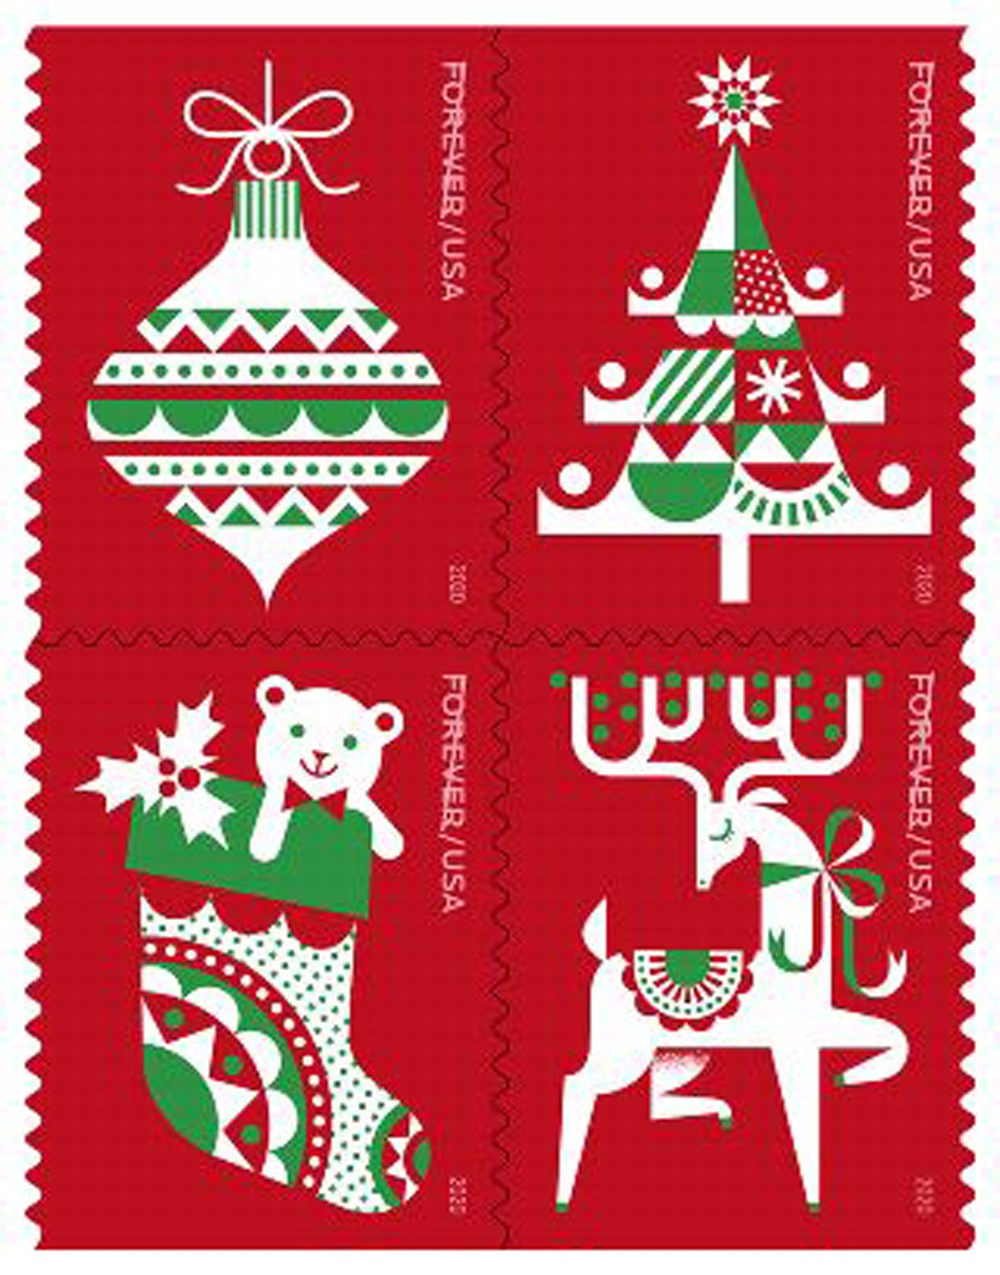 Holiday Delights Forever Stamps Book of 20 Forever Postage Stamps Scott